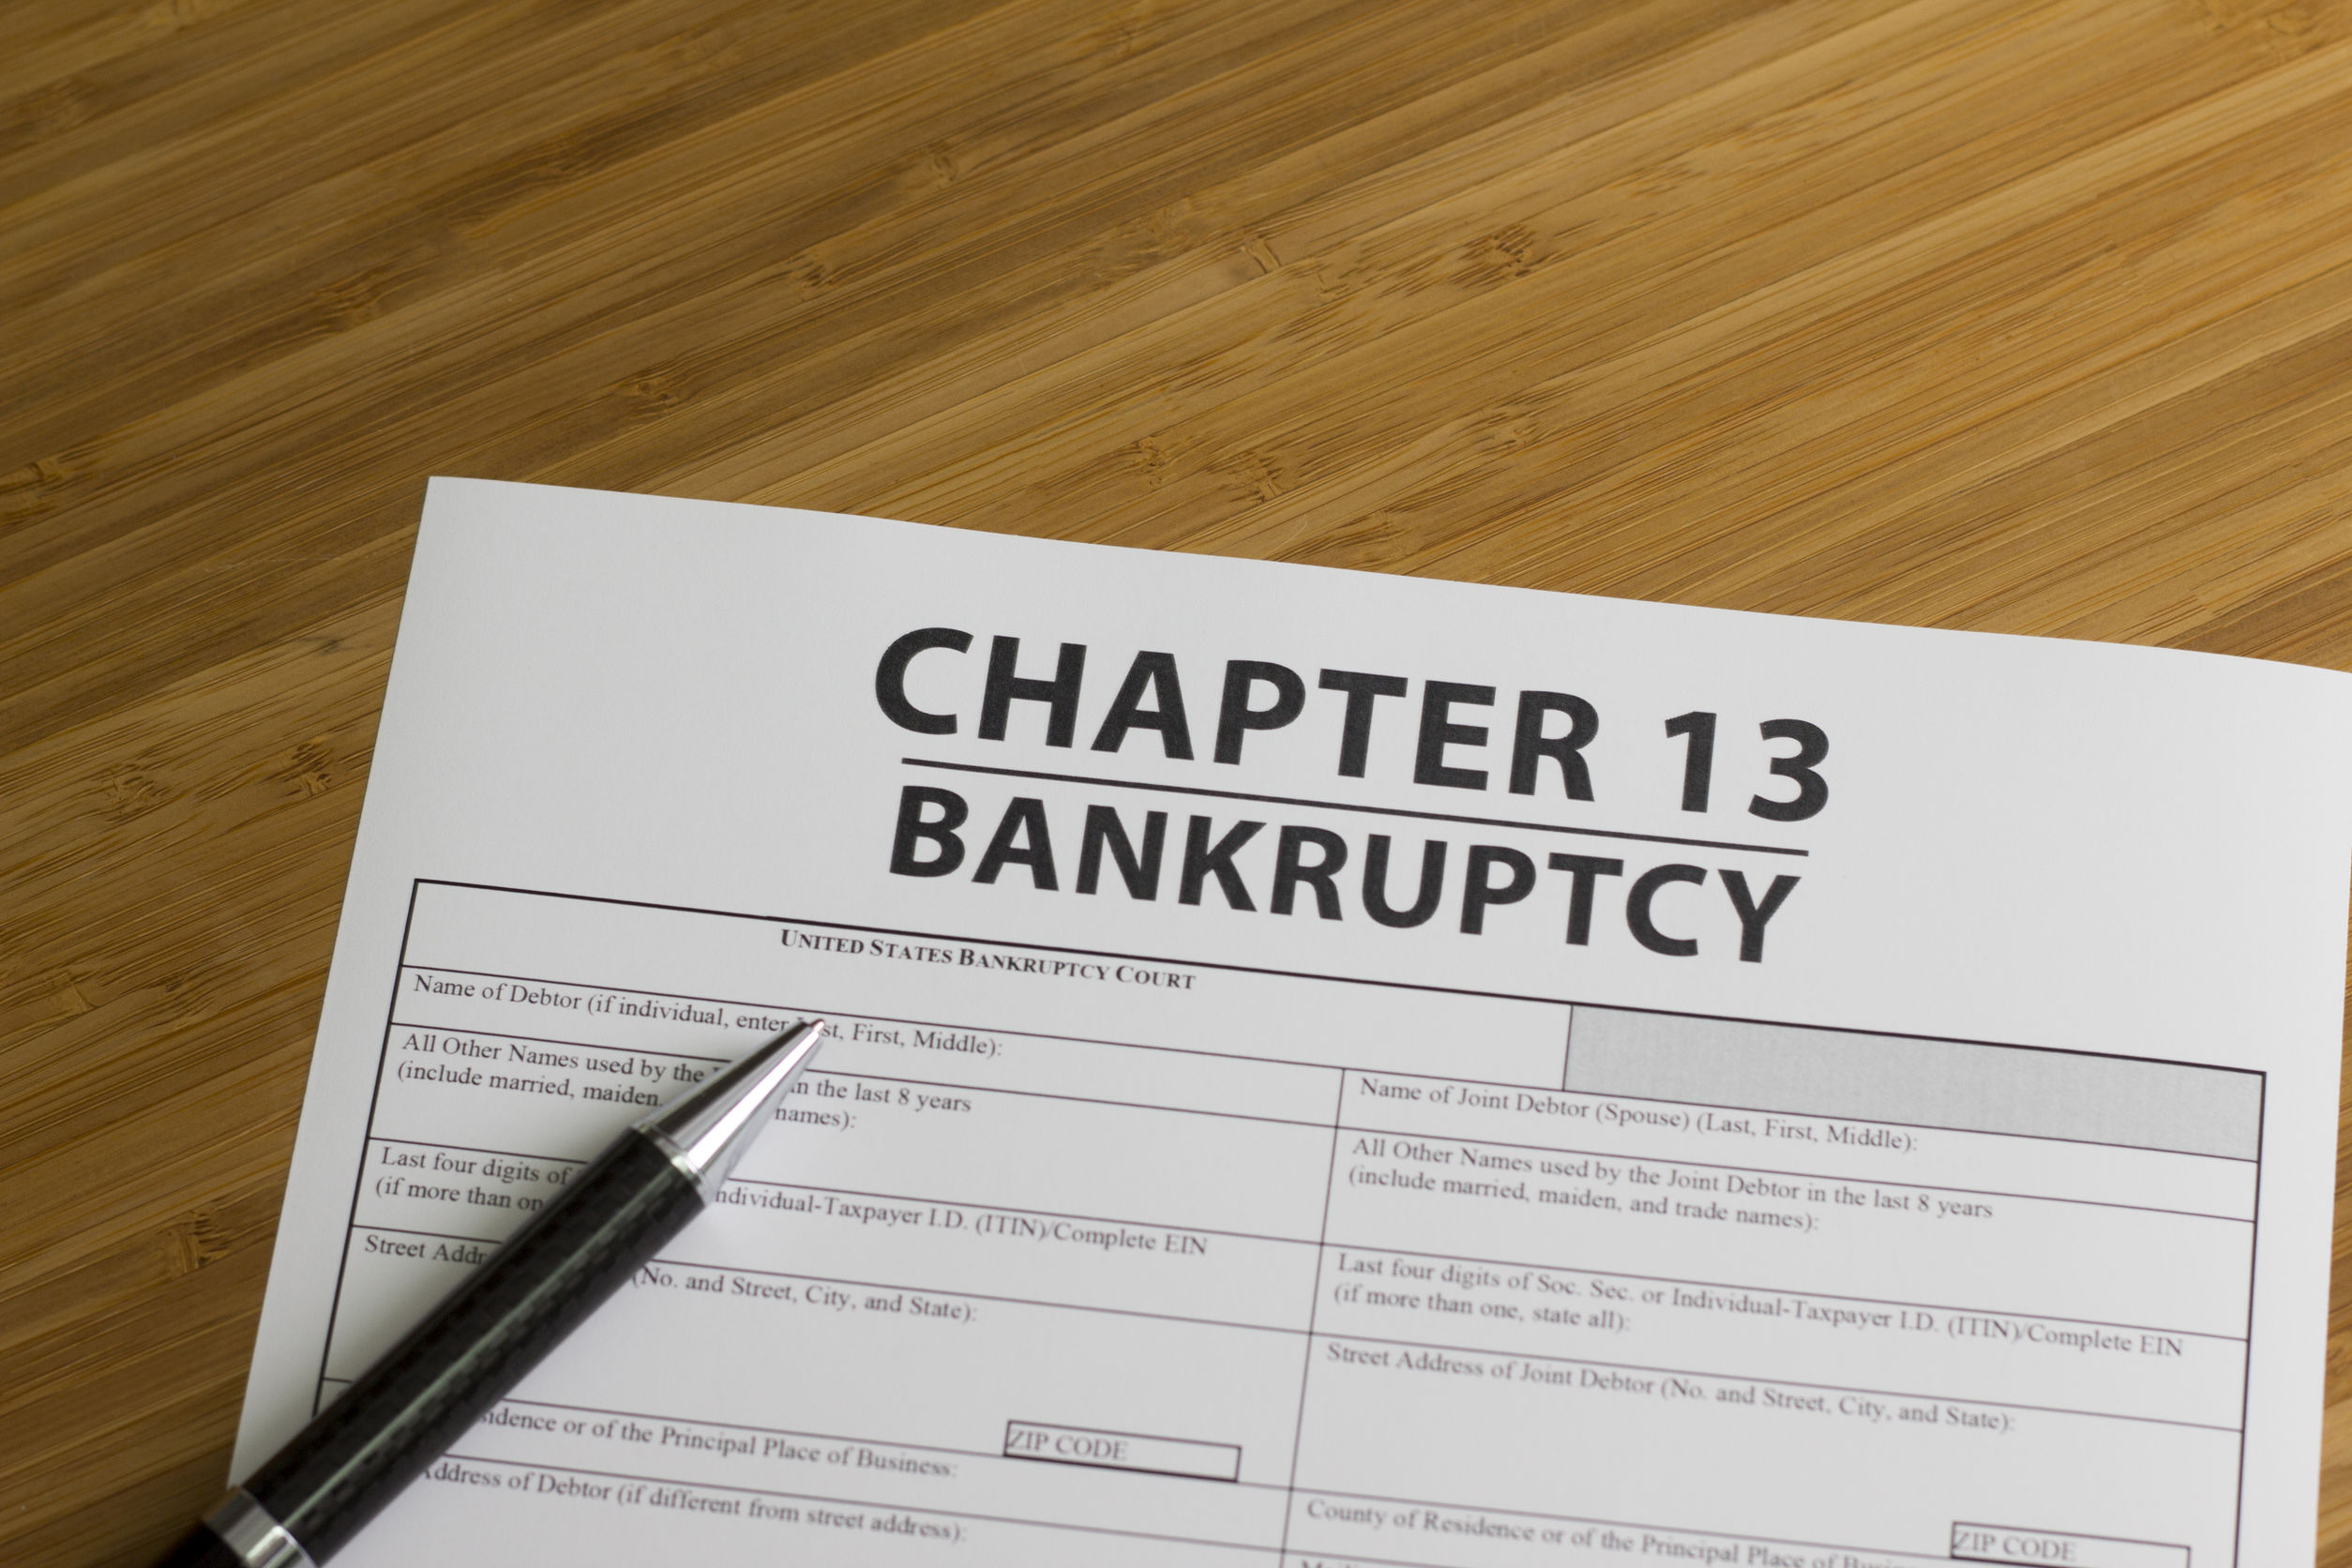 Chapter 13 Bankruptcy Lawyer Tampa, FL - Carolyn Secor, P.A.